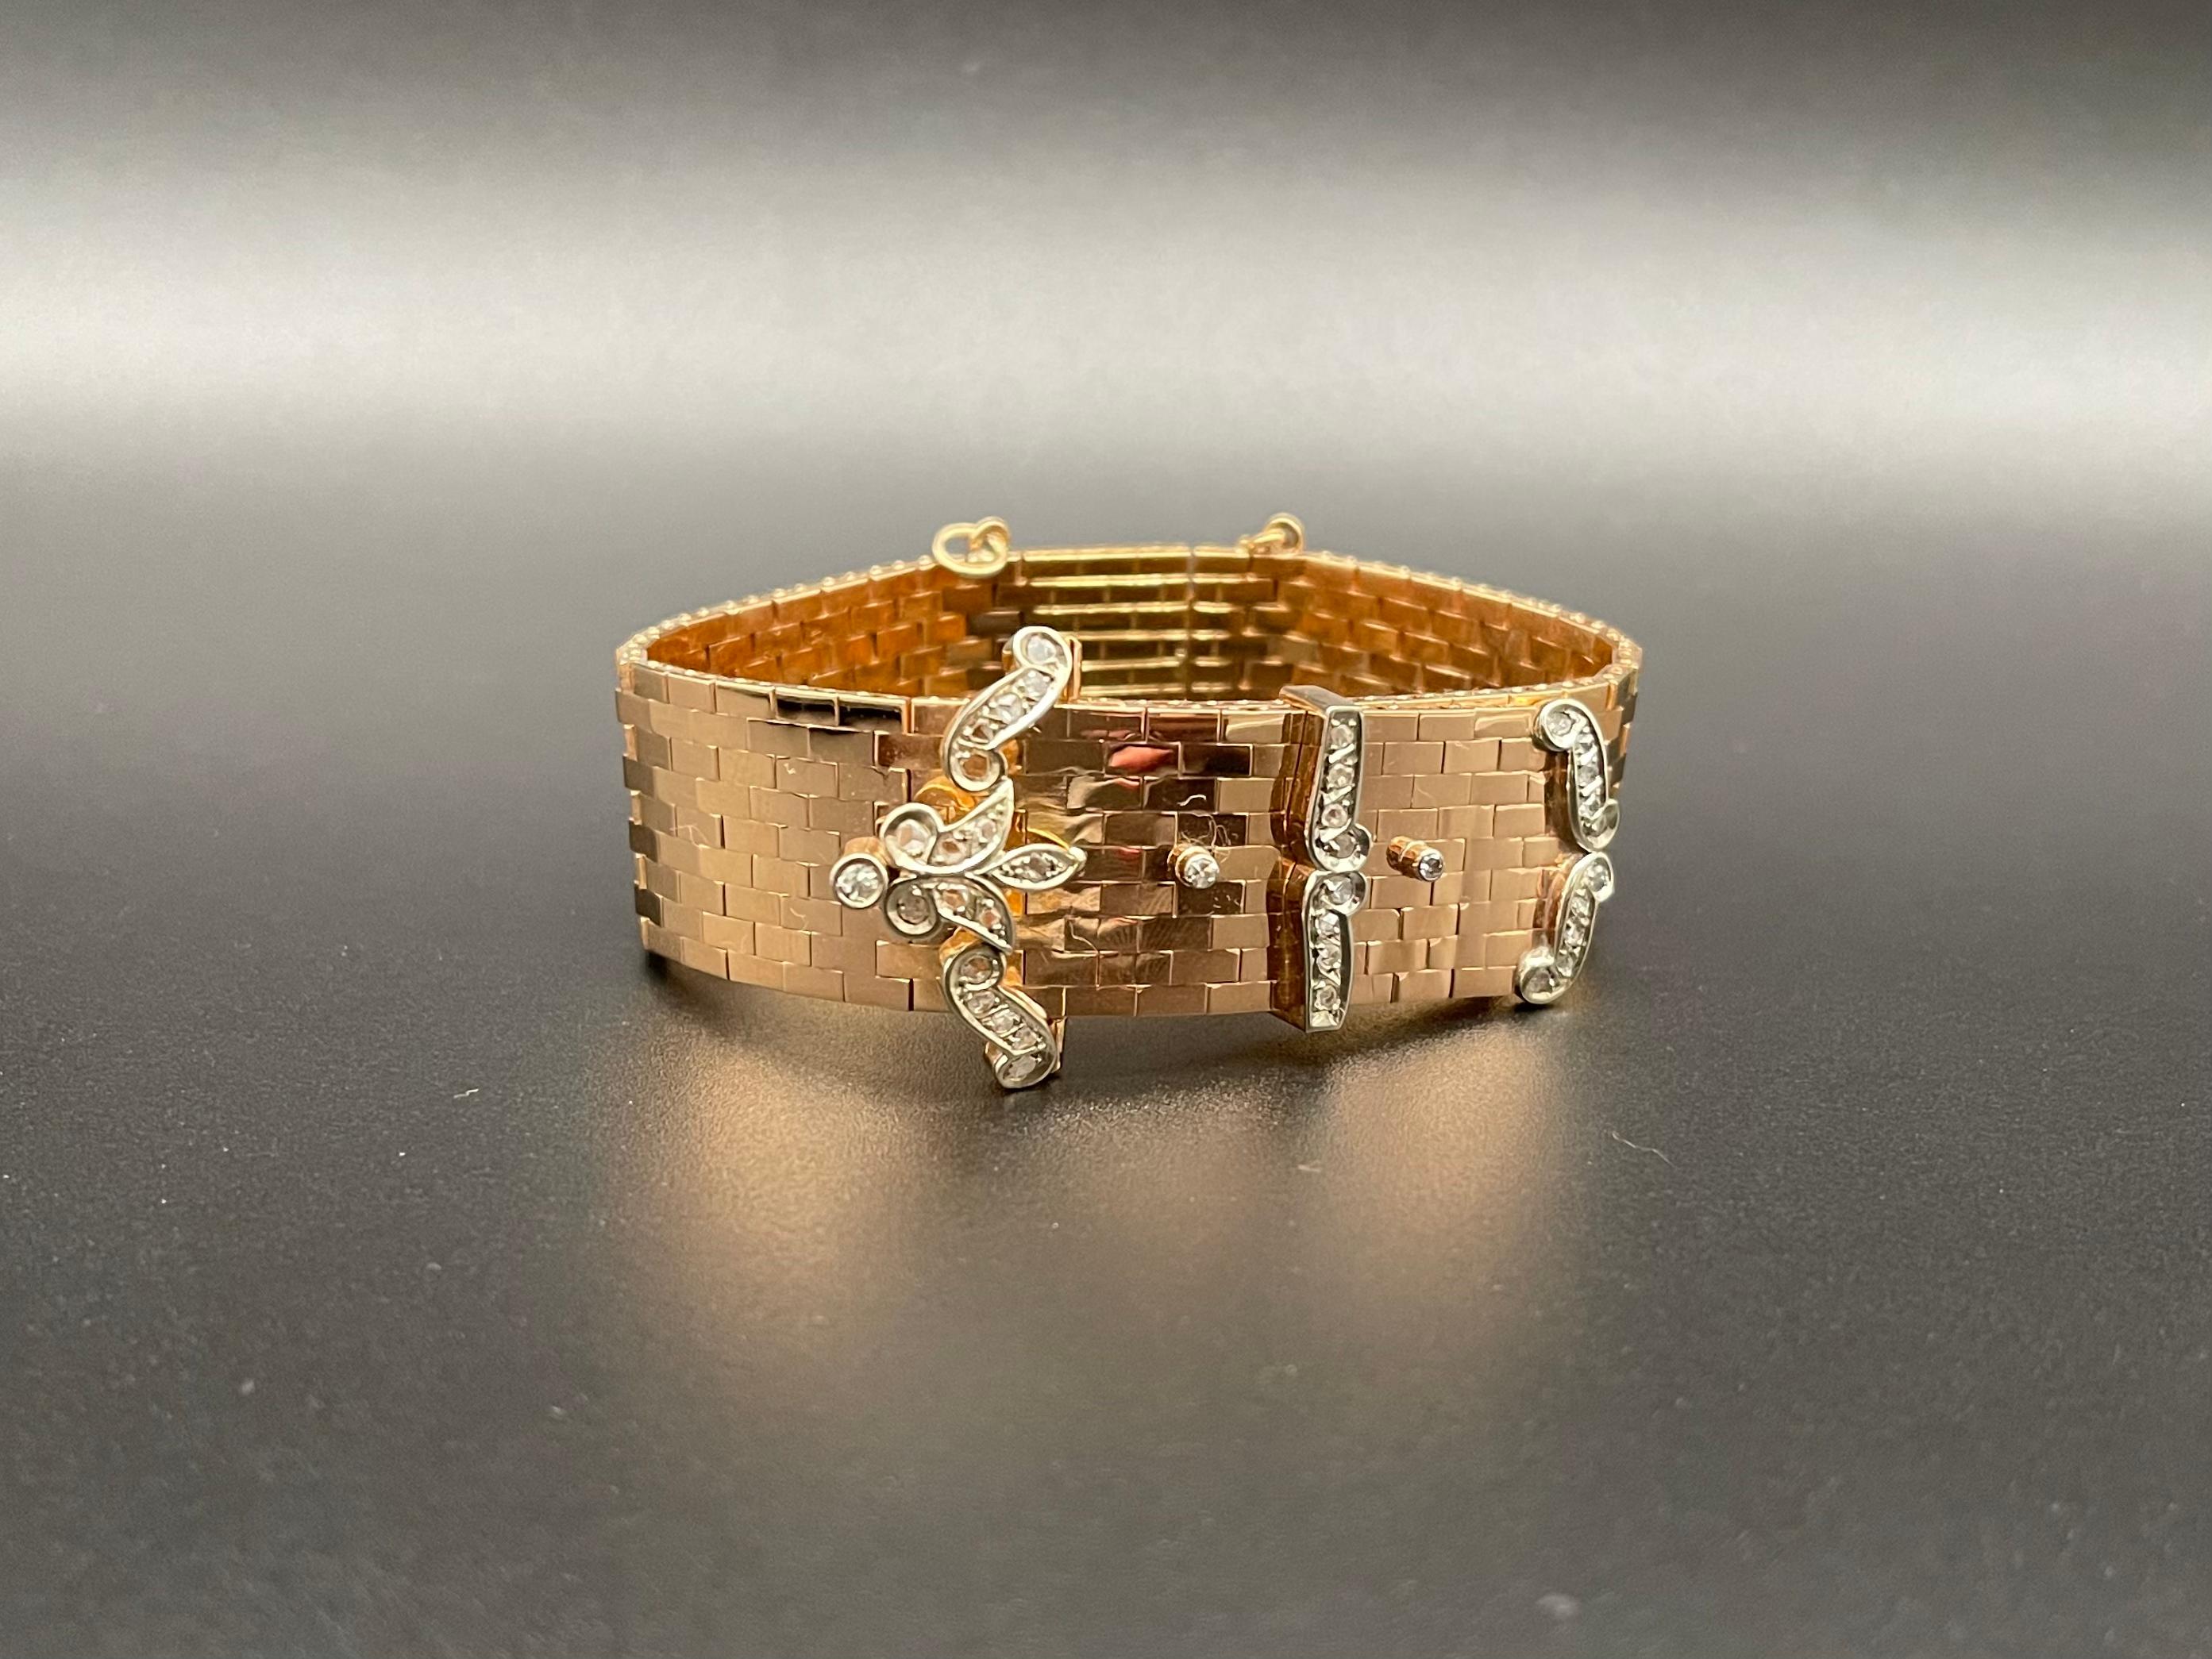 A magnificent 1950s Retro Belt Bracelet in the Style of Art Deco, with a beautiful fleur-de-lis in the classical Tiffanys Style in Bold Gold.

The Belt Mesh is made of 19.2 Karat Portuguese Gold and Platinum. The beautiful fleur-de-lis and details